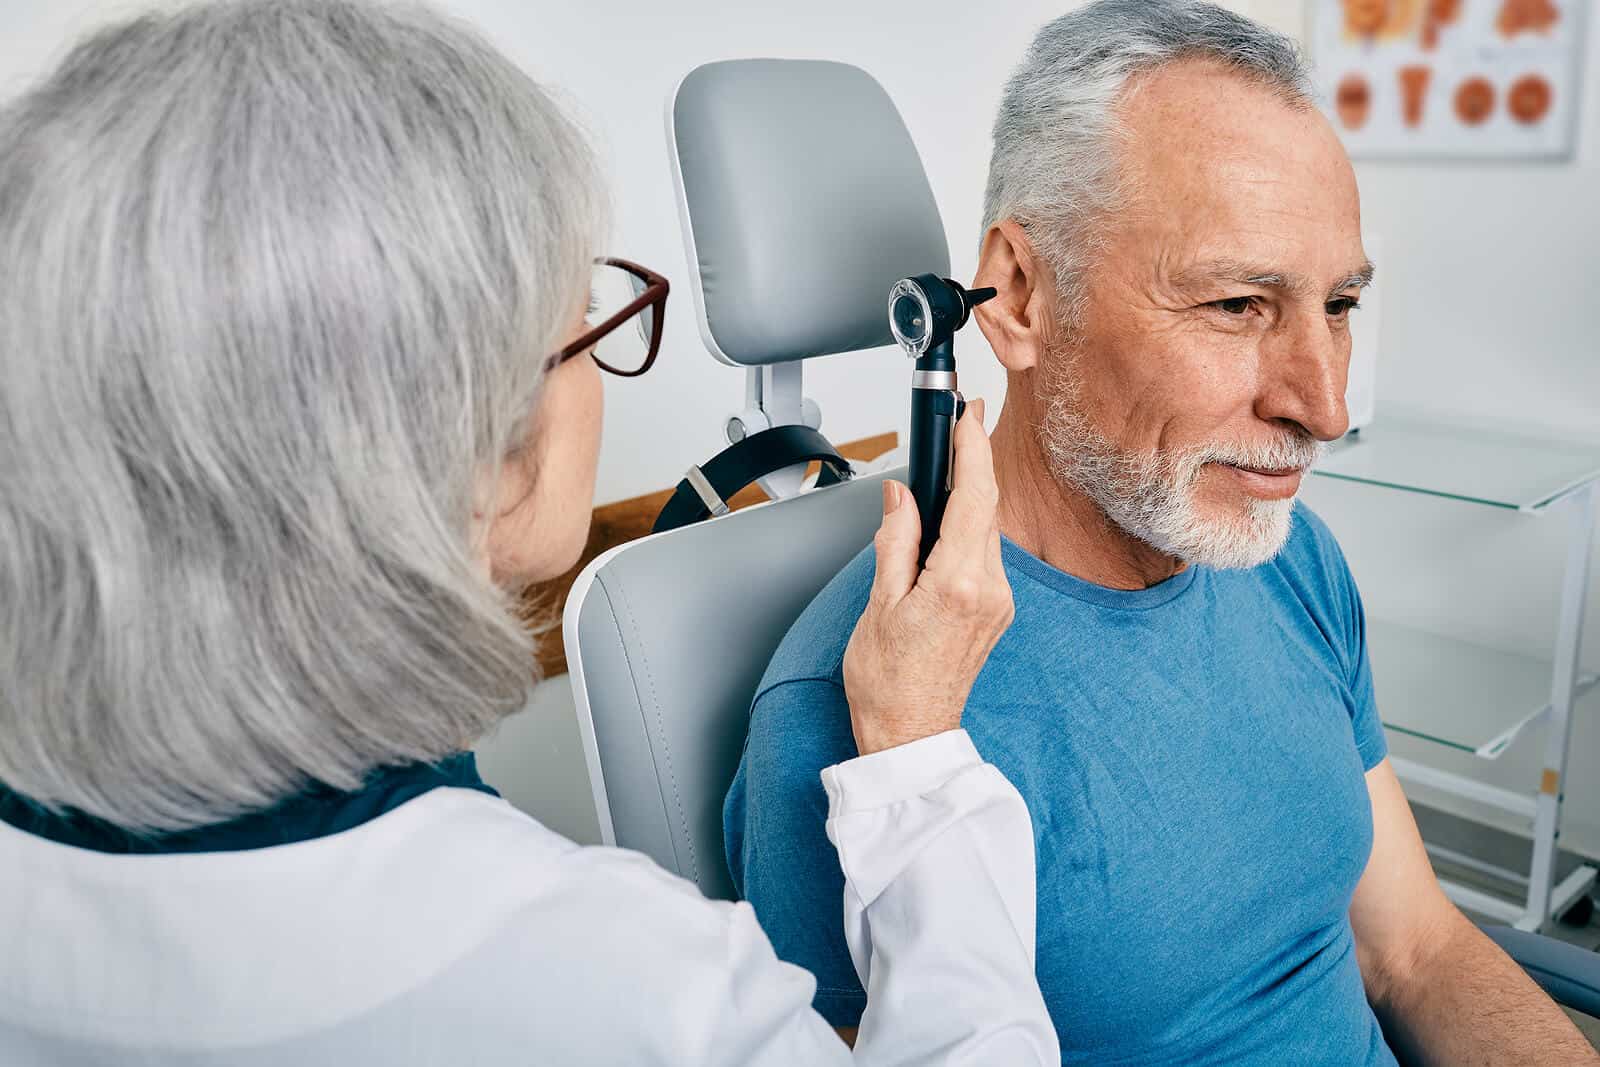 Featured image for “Hearing Loss Treatment Could Improve Care of Older Adults”